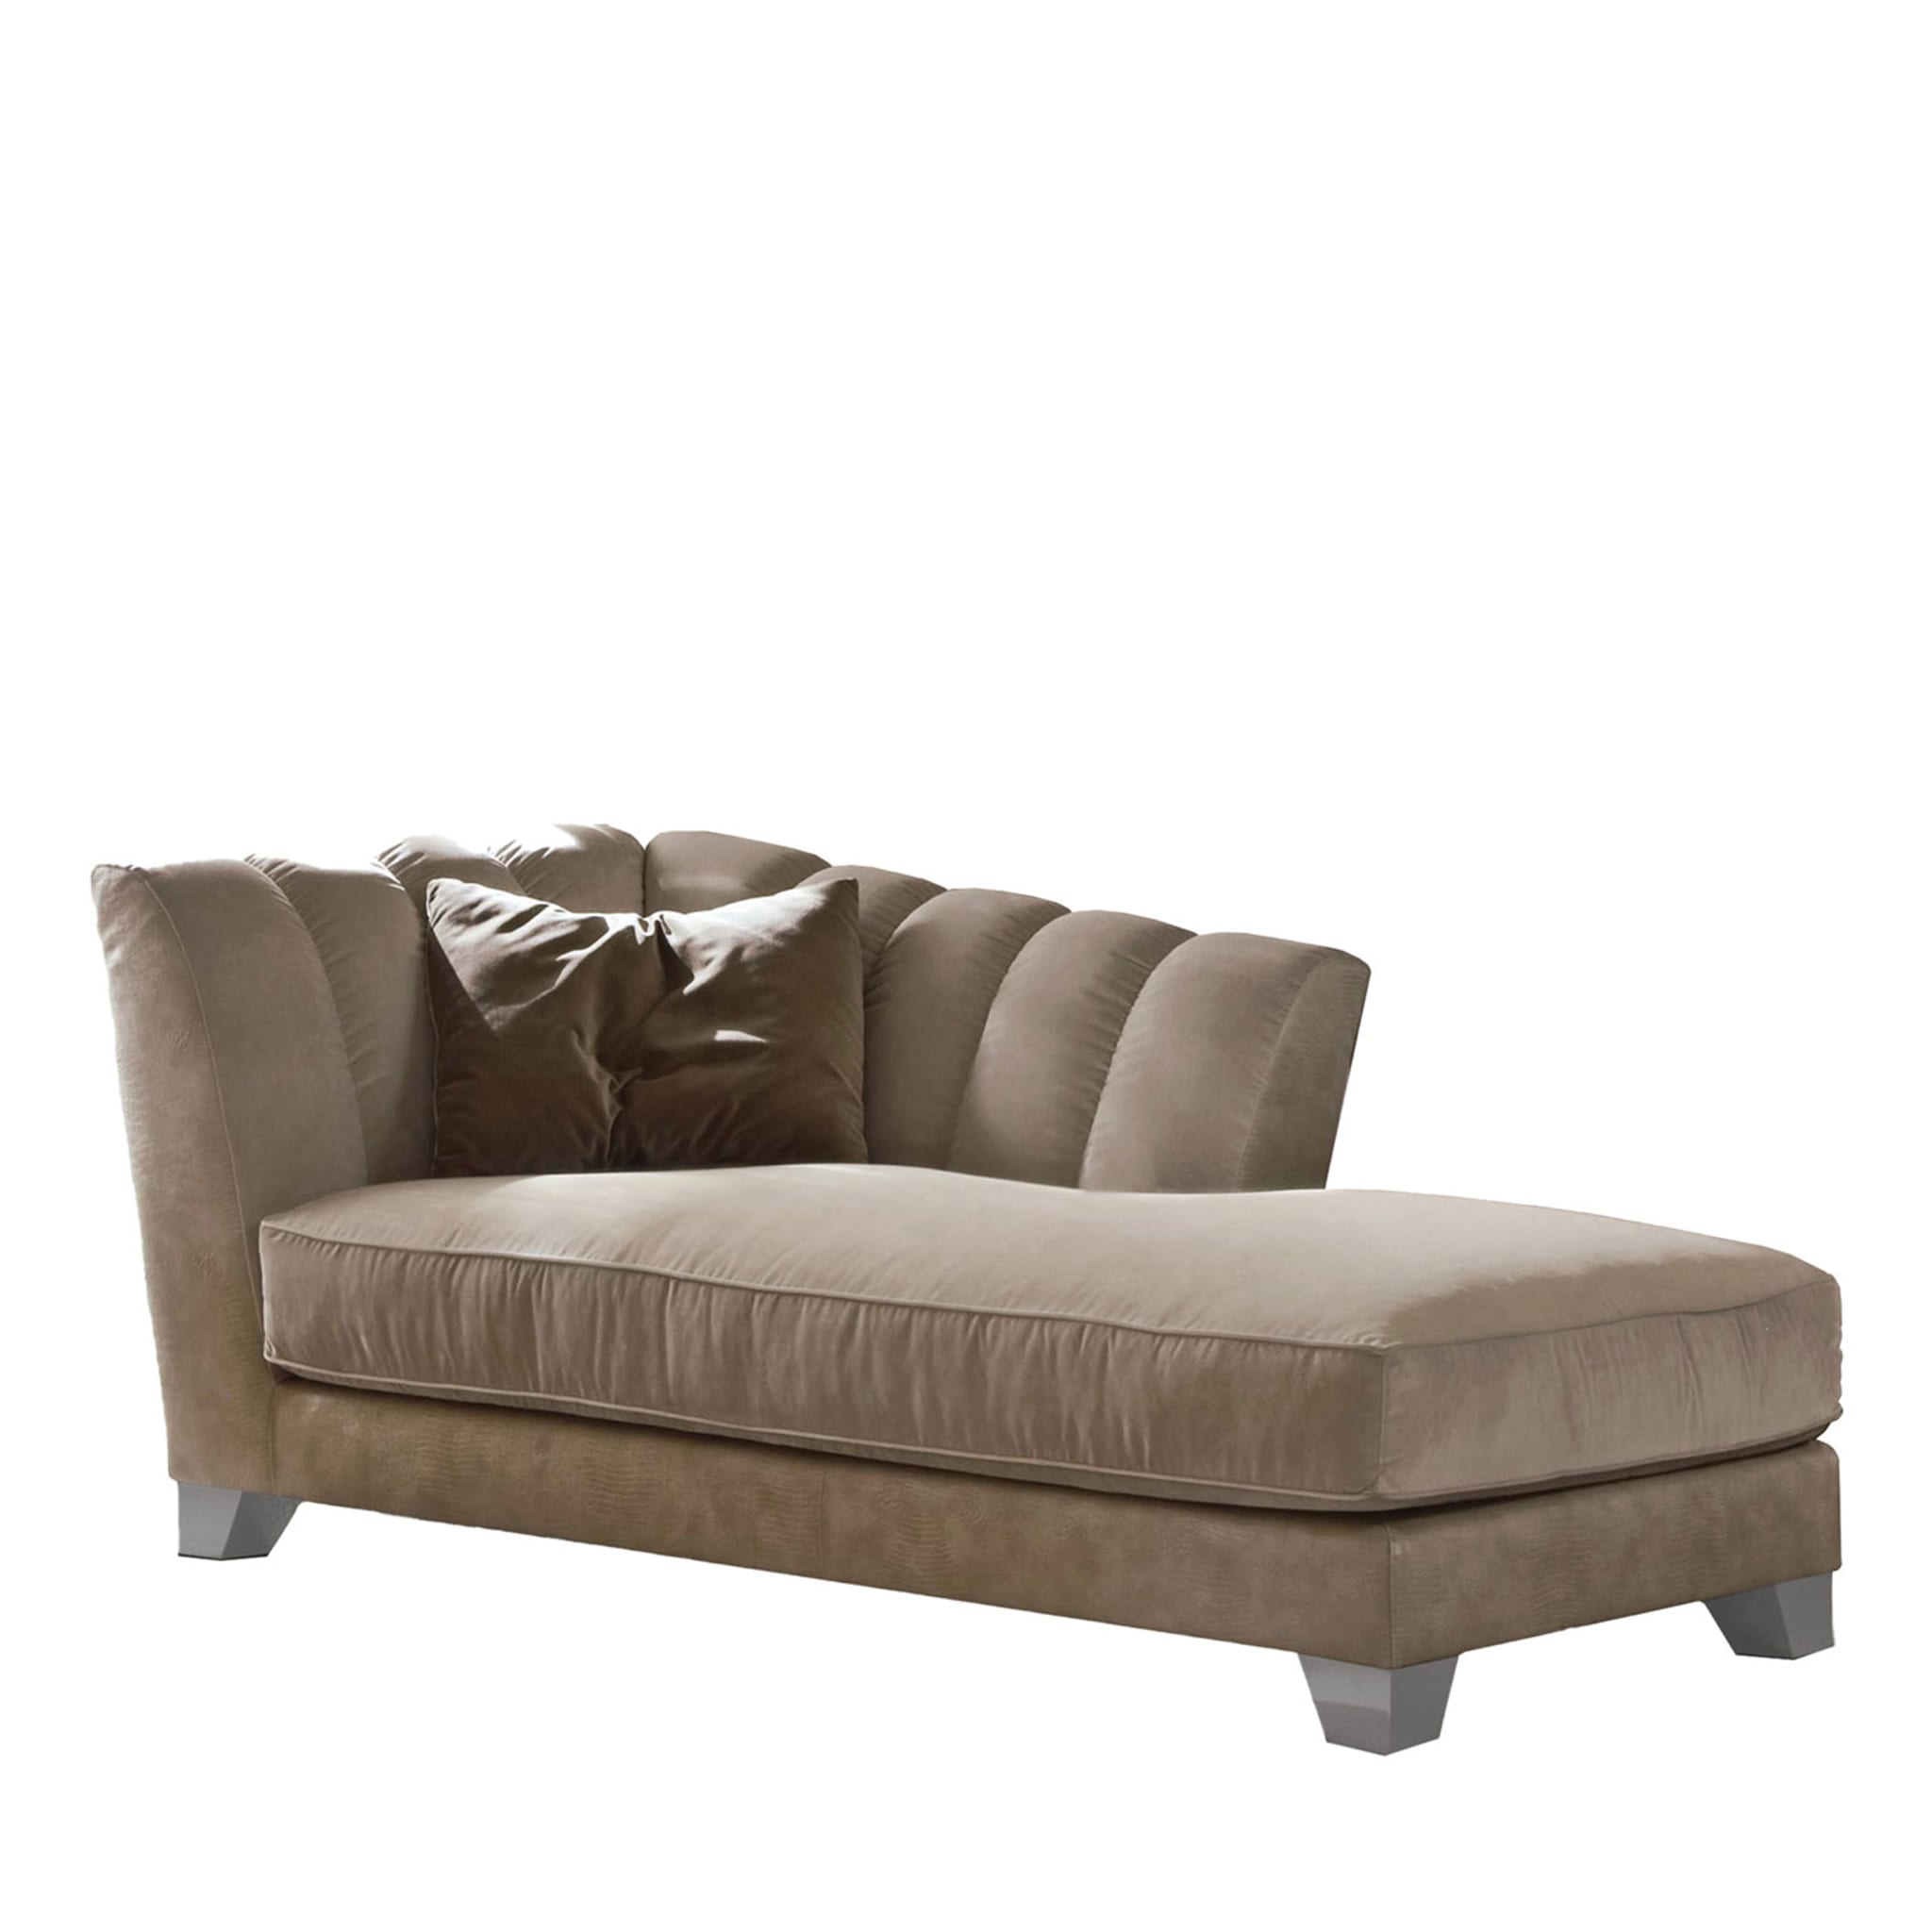 Sunrise Left-Sided Brown fabric Chaise Longue - Main view